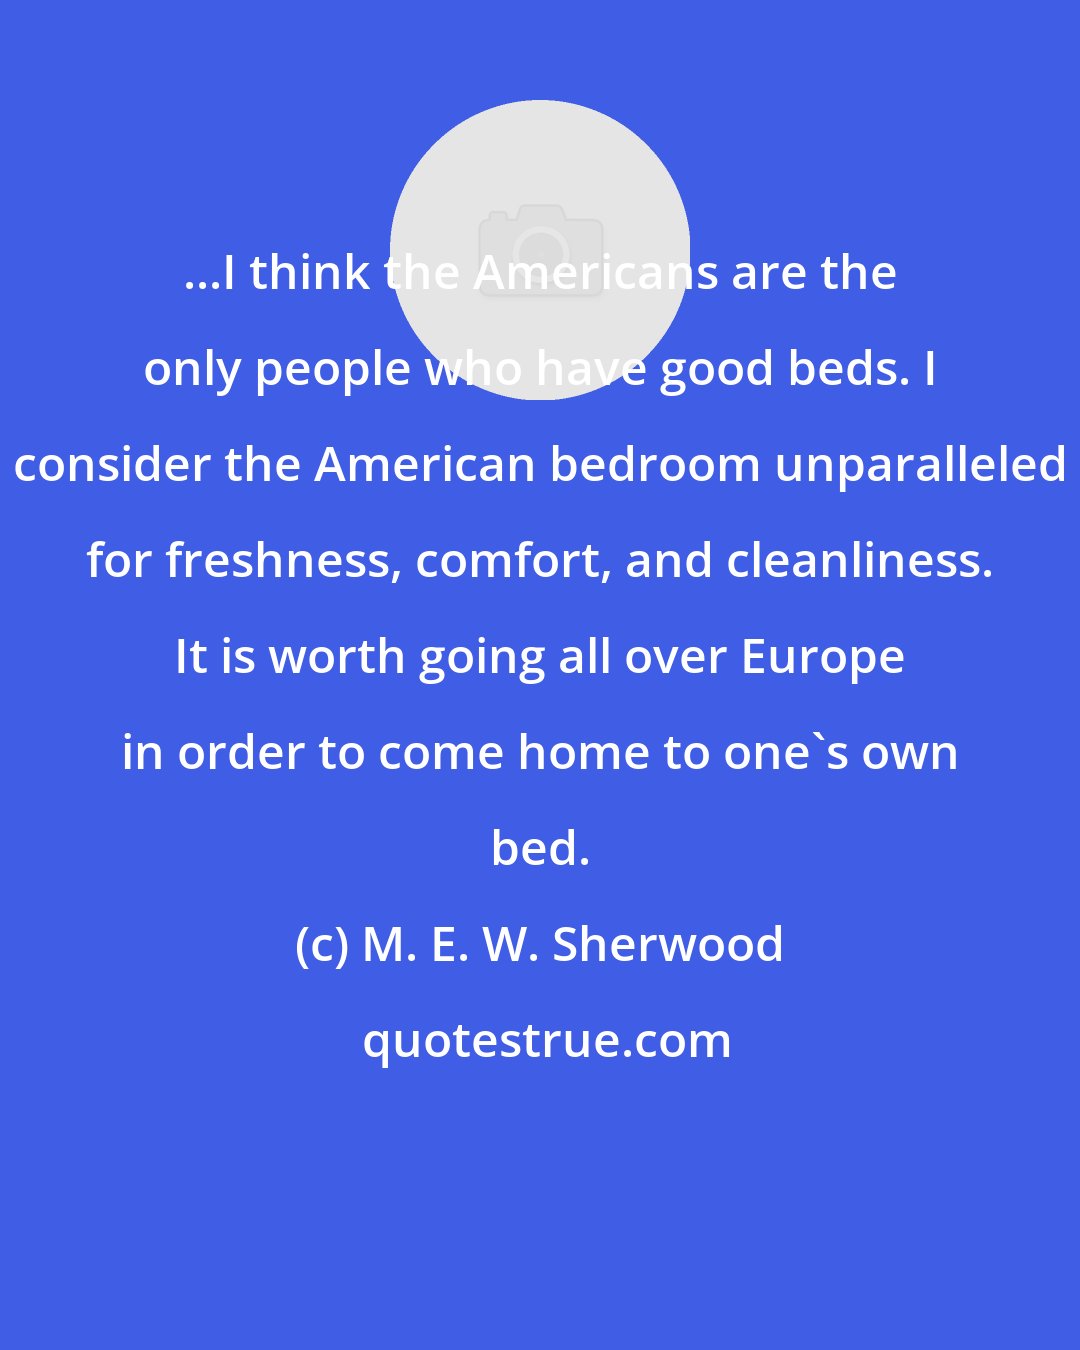 M. E. W. Sherwood: ...I think the Americans are the only people who have good beds. I consider the American bedroom unparalleled for freshness, comfort, and cleanliness. It is worth going all over Europe in order to come home to one's own bed.